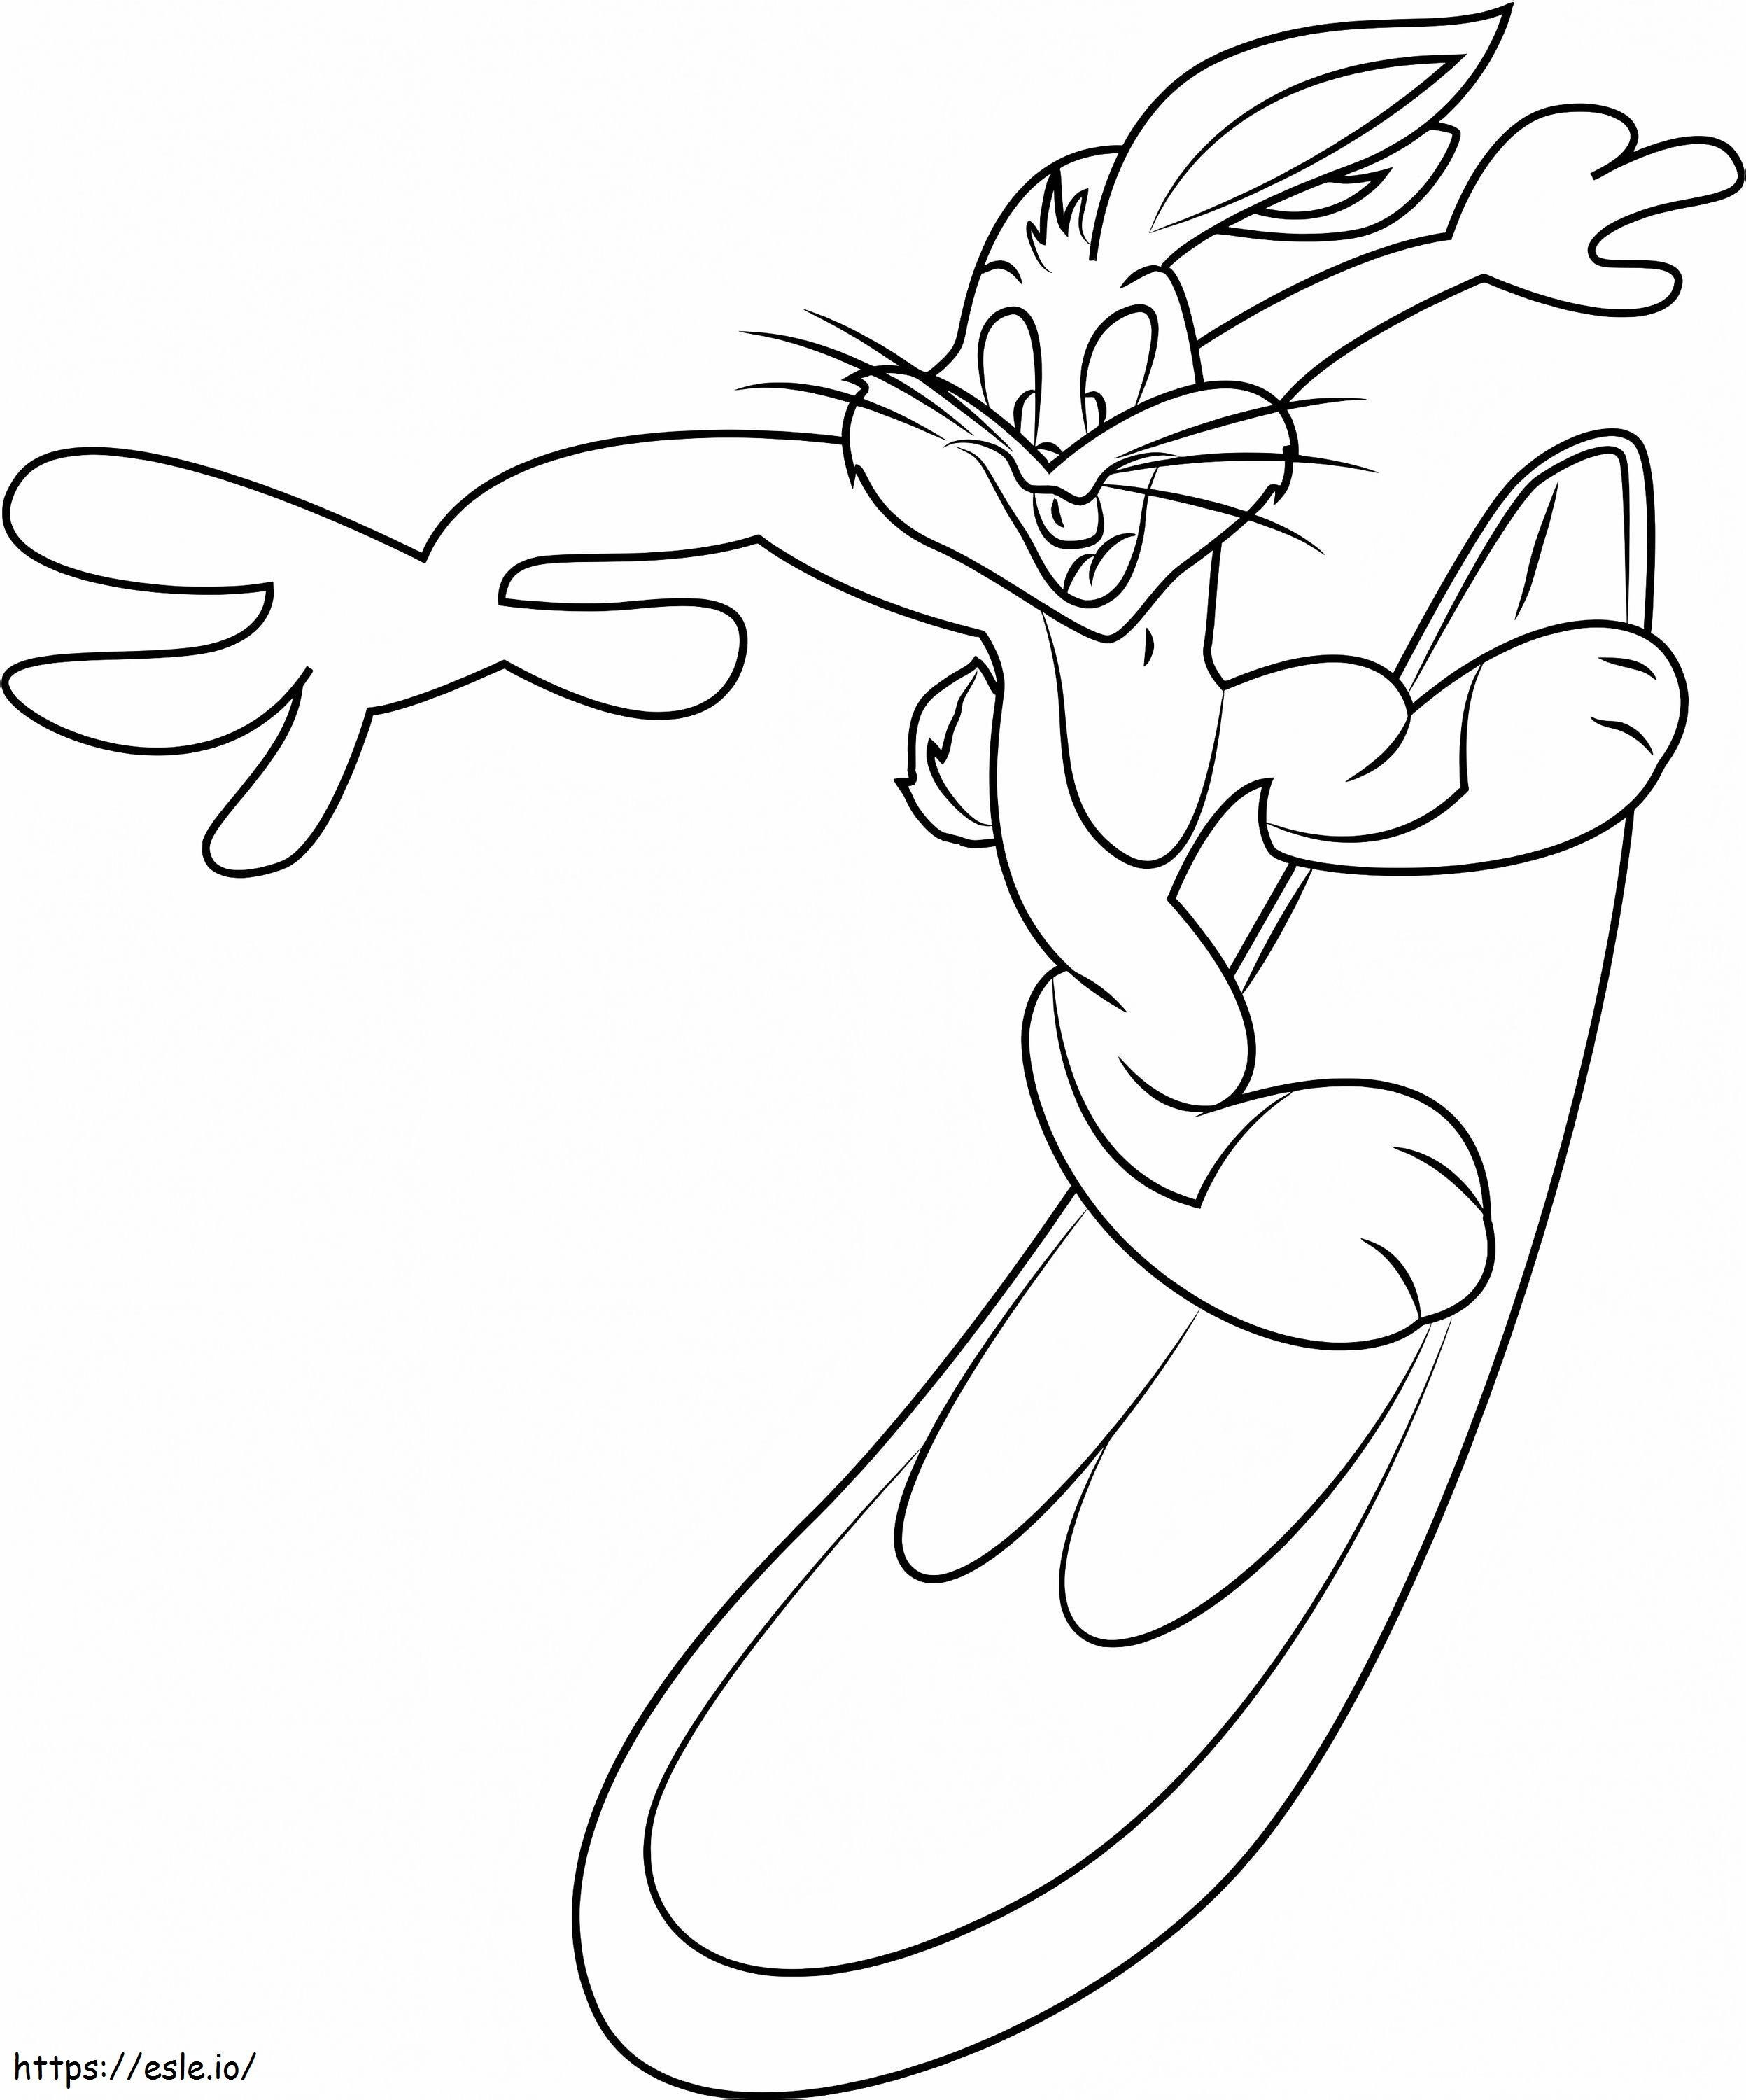 Bugs Bunny Windsurfing coloring page